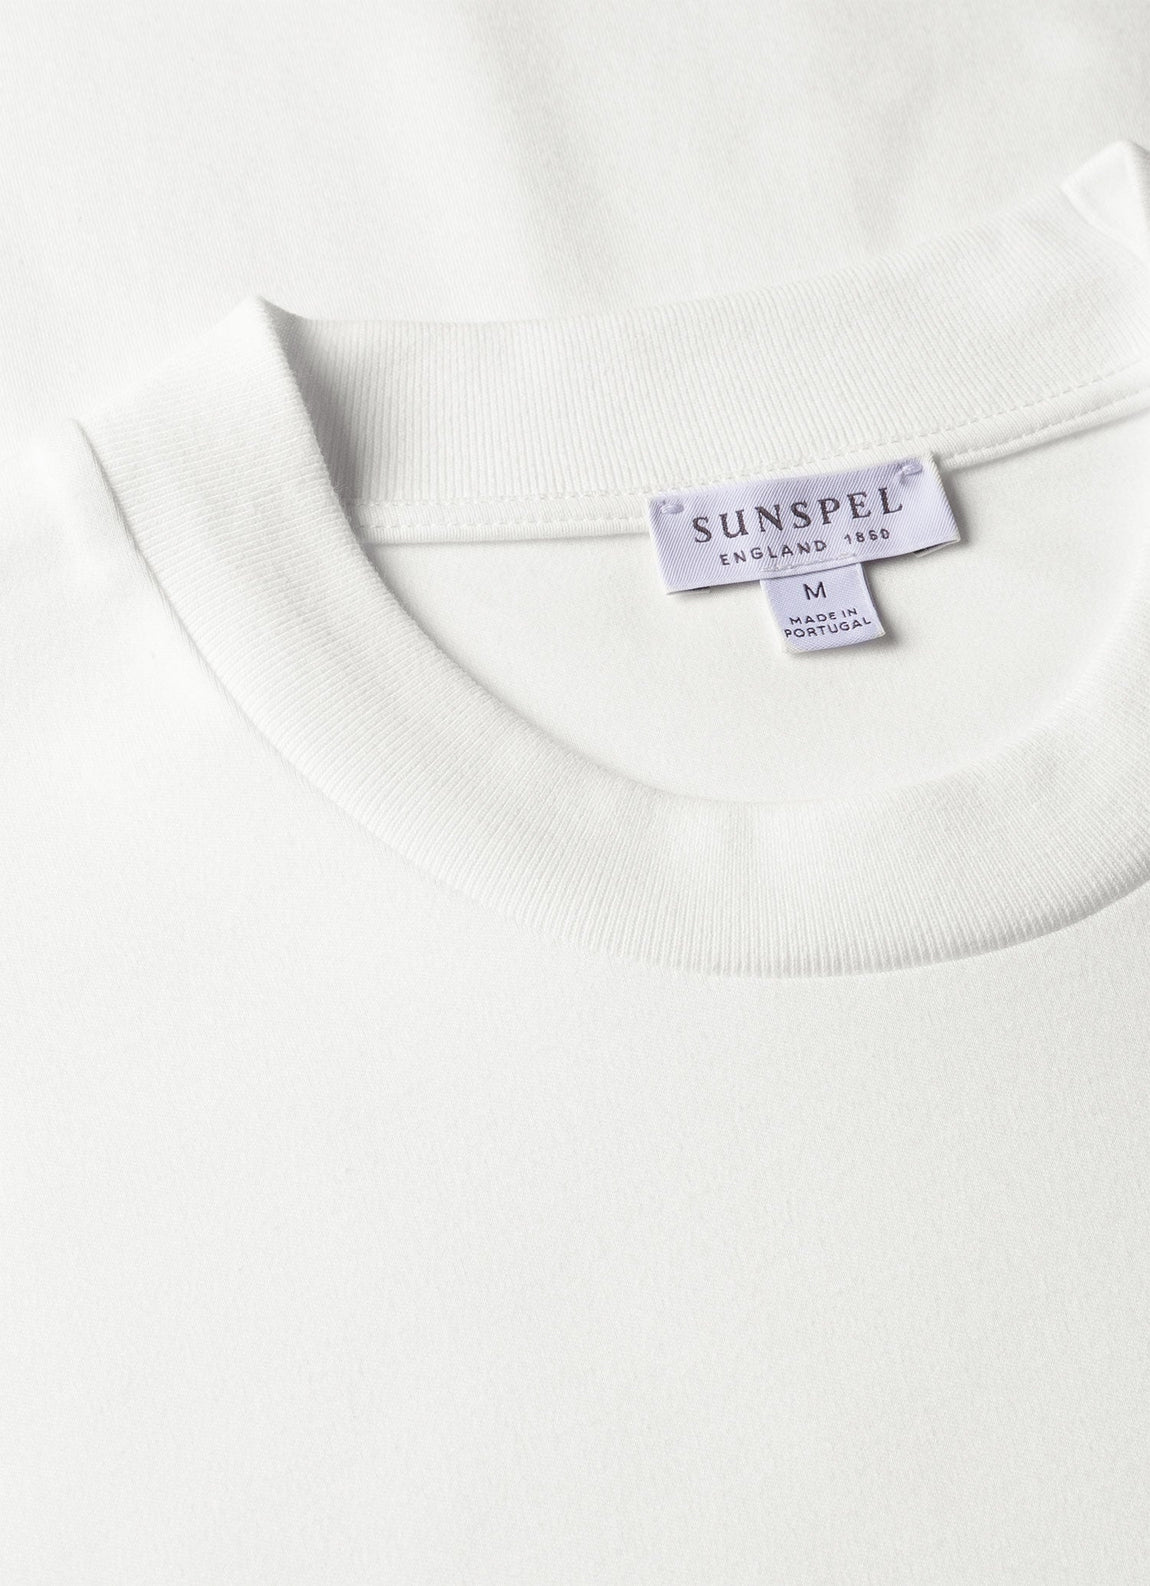 Men's Relaxed Fit Heavyweight T-shirt in Off-White | Sunspel